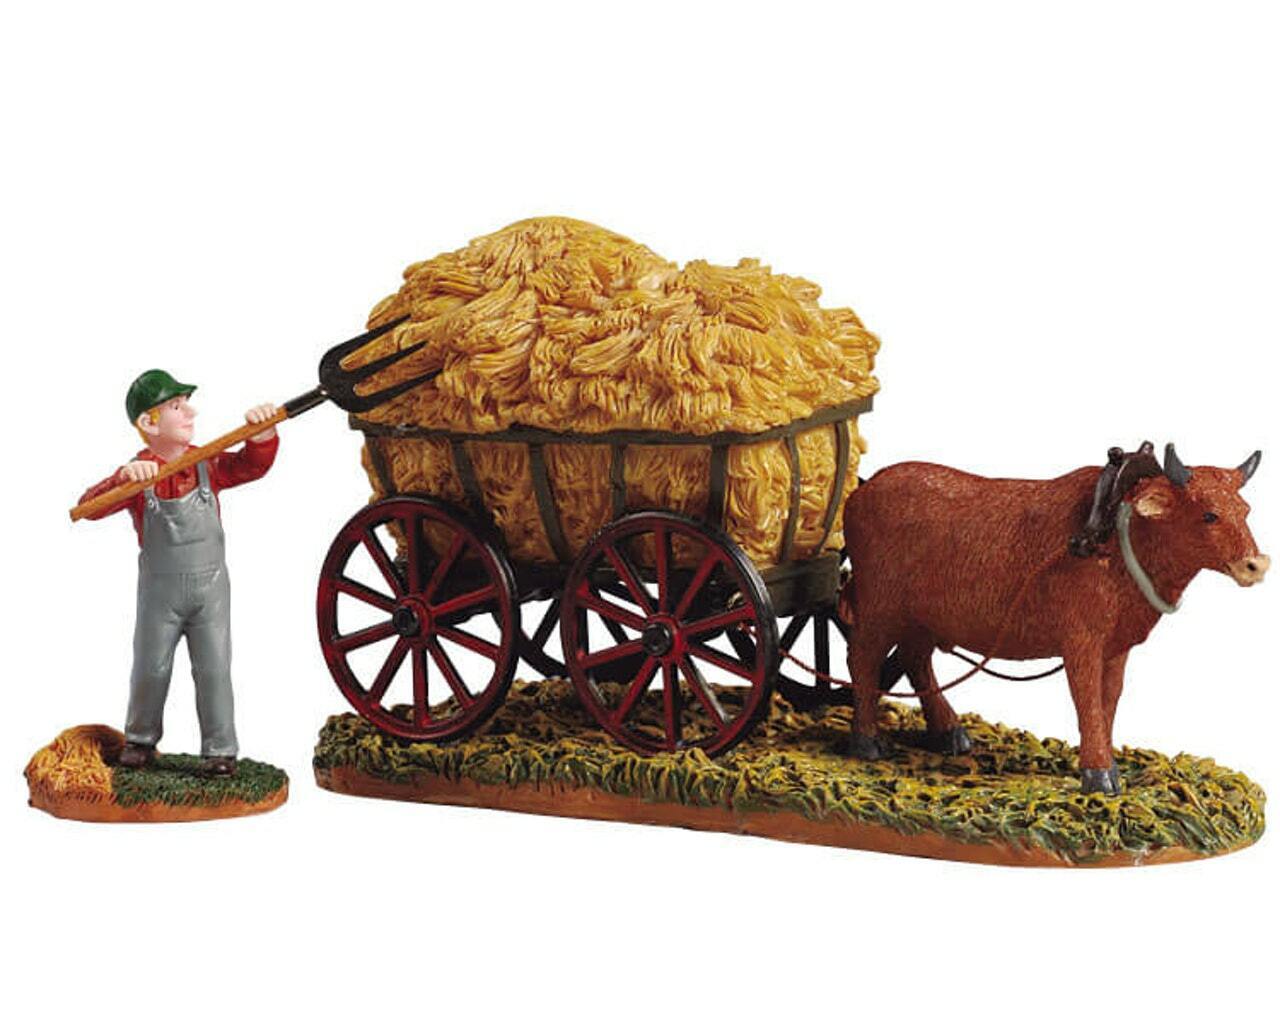 Lemax 2005 Pitching Hay Village Collection #53525 Set Of 2 Table Accents Retired